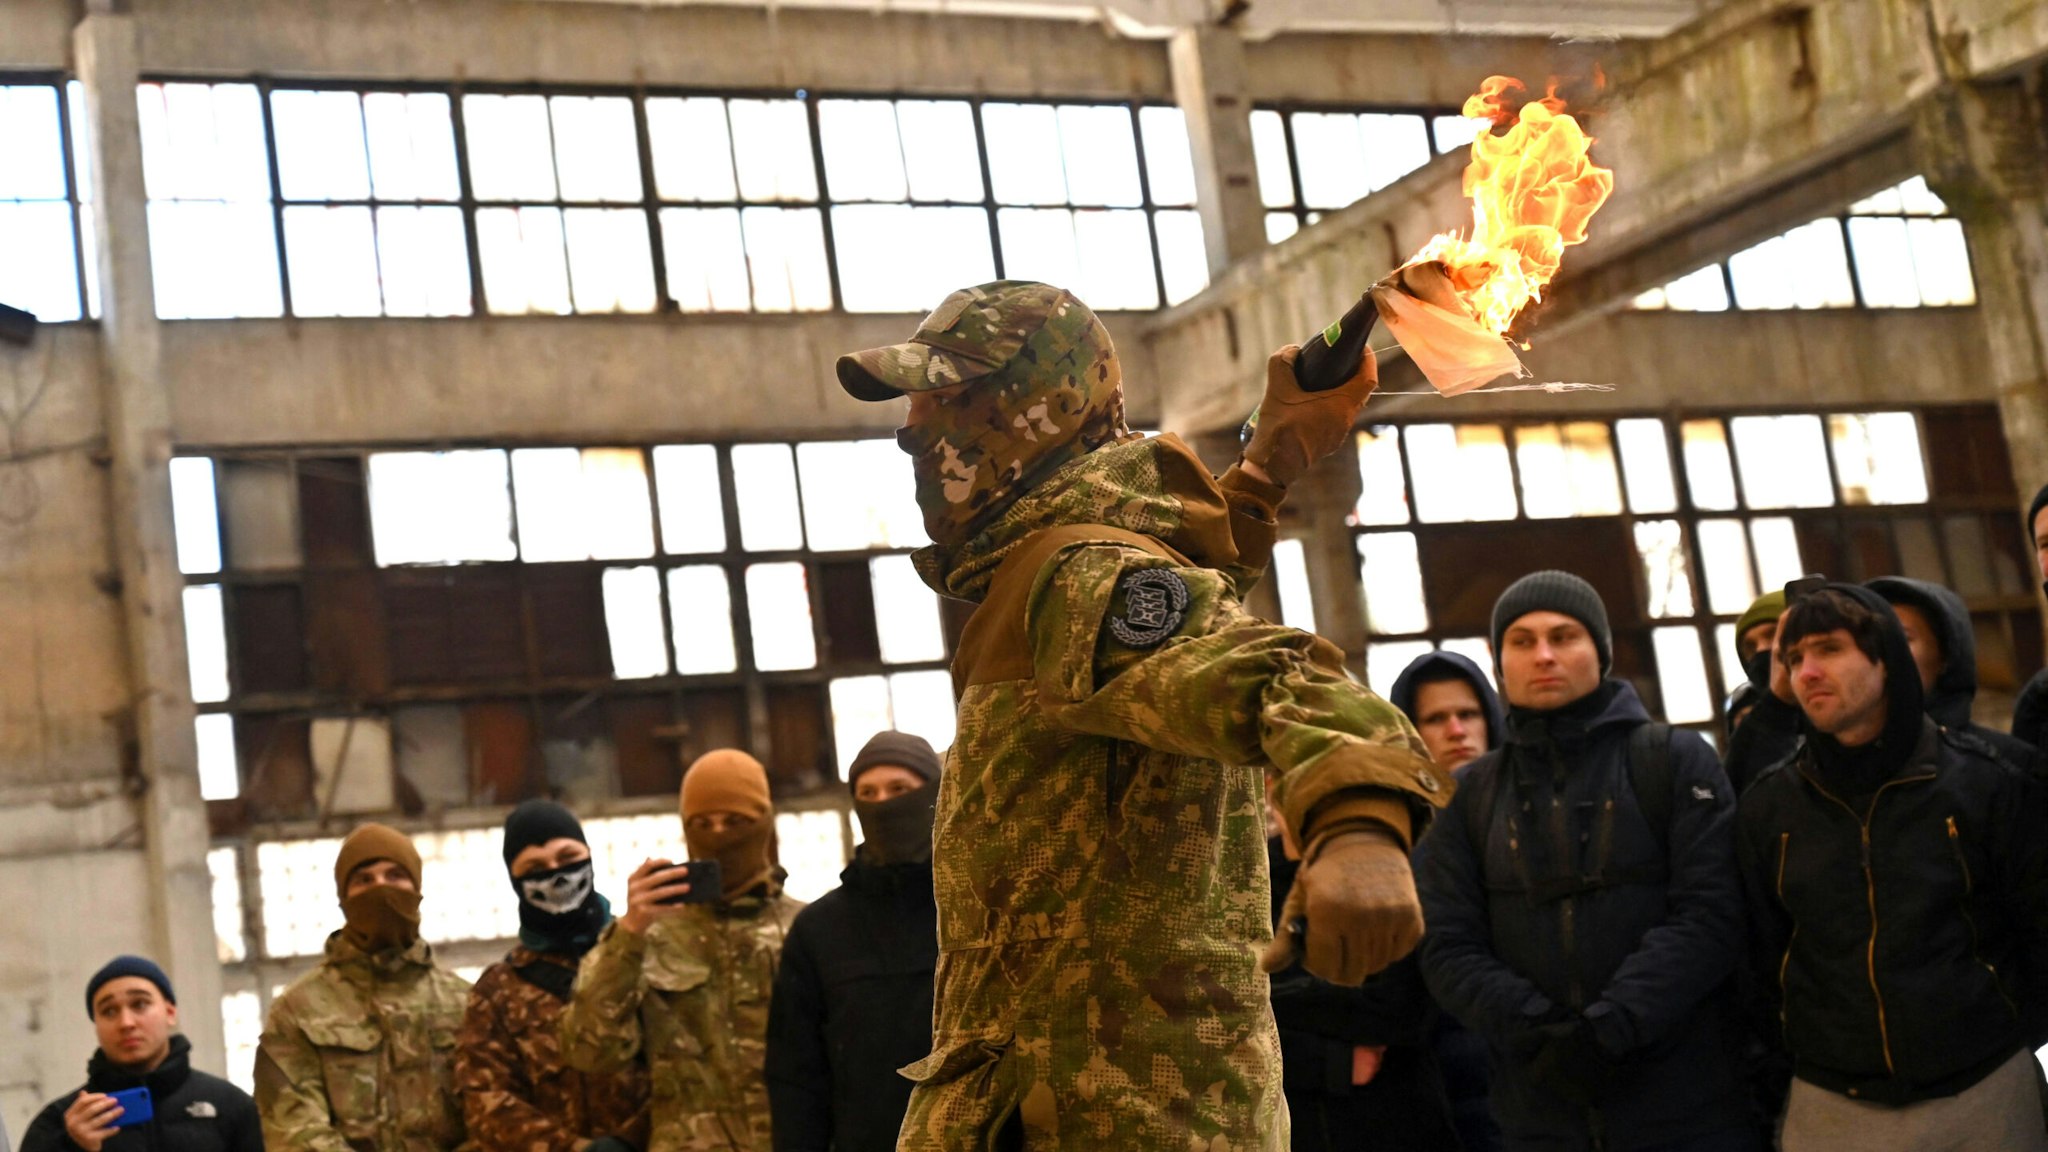 TOPSHOT - A military instructor teaches civilians to use Molotov cocktails during a training session at an abandoned factory in the Ukrainian capital of Kyiv on February 6, 2022. - Amid fears of a potential invasion by Russian troops massed on Ukraine's border, within the framework of the training there were classes on tactics, paramedics, training on the obstacle course. The training is conducted by instructors with combat experience, members of the movement "Total Resistance". Ukraine's presidency on February 06, insisted the chance of resolving soaring tensions with Russia through diplomacy remained greater than that of an attack, as the US warned Moscow was stepping up preparations for an invasion. "An honest assessment of the situation suggests that the chance of finding a diplomatic solution for de-escalation is still substantially higher than the threat of further escalation," said presidency advisor Mykhailo Podolyak in a statement.